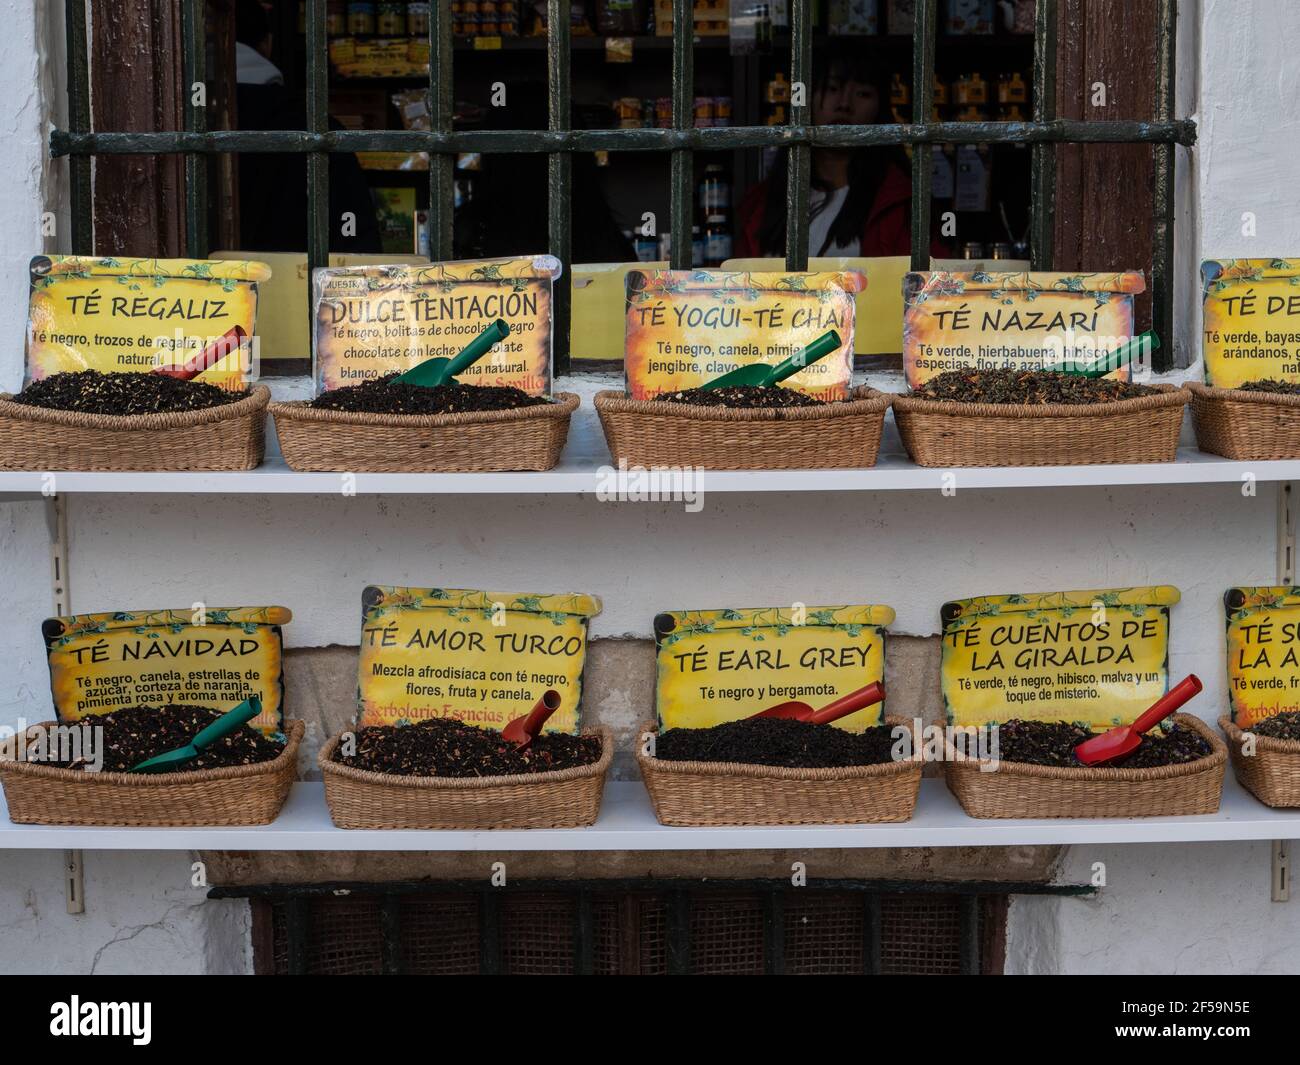 A shop frontage with a display of herbal teas and medicinal products Seville Spain Stock Photo